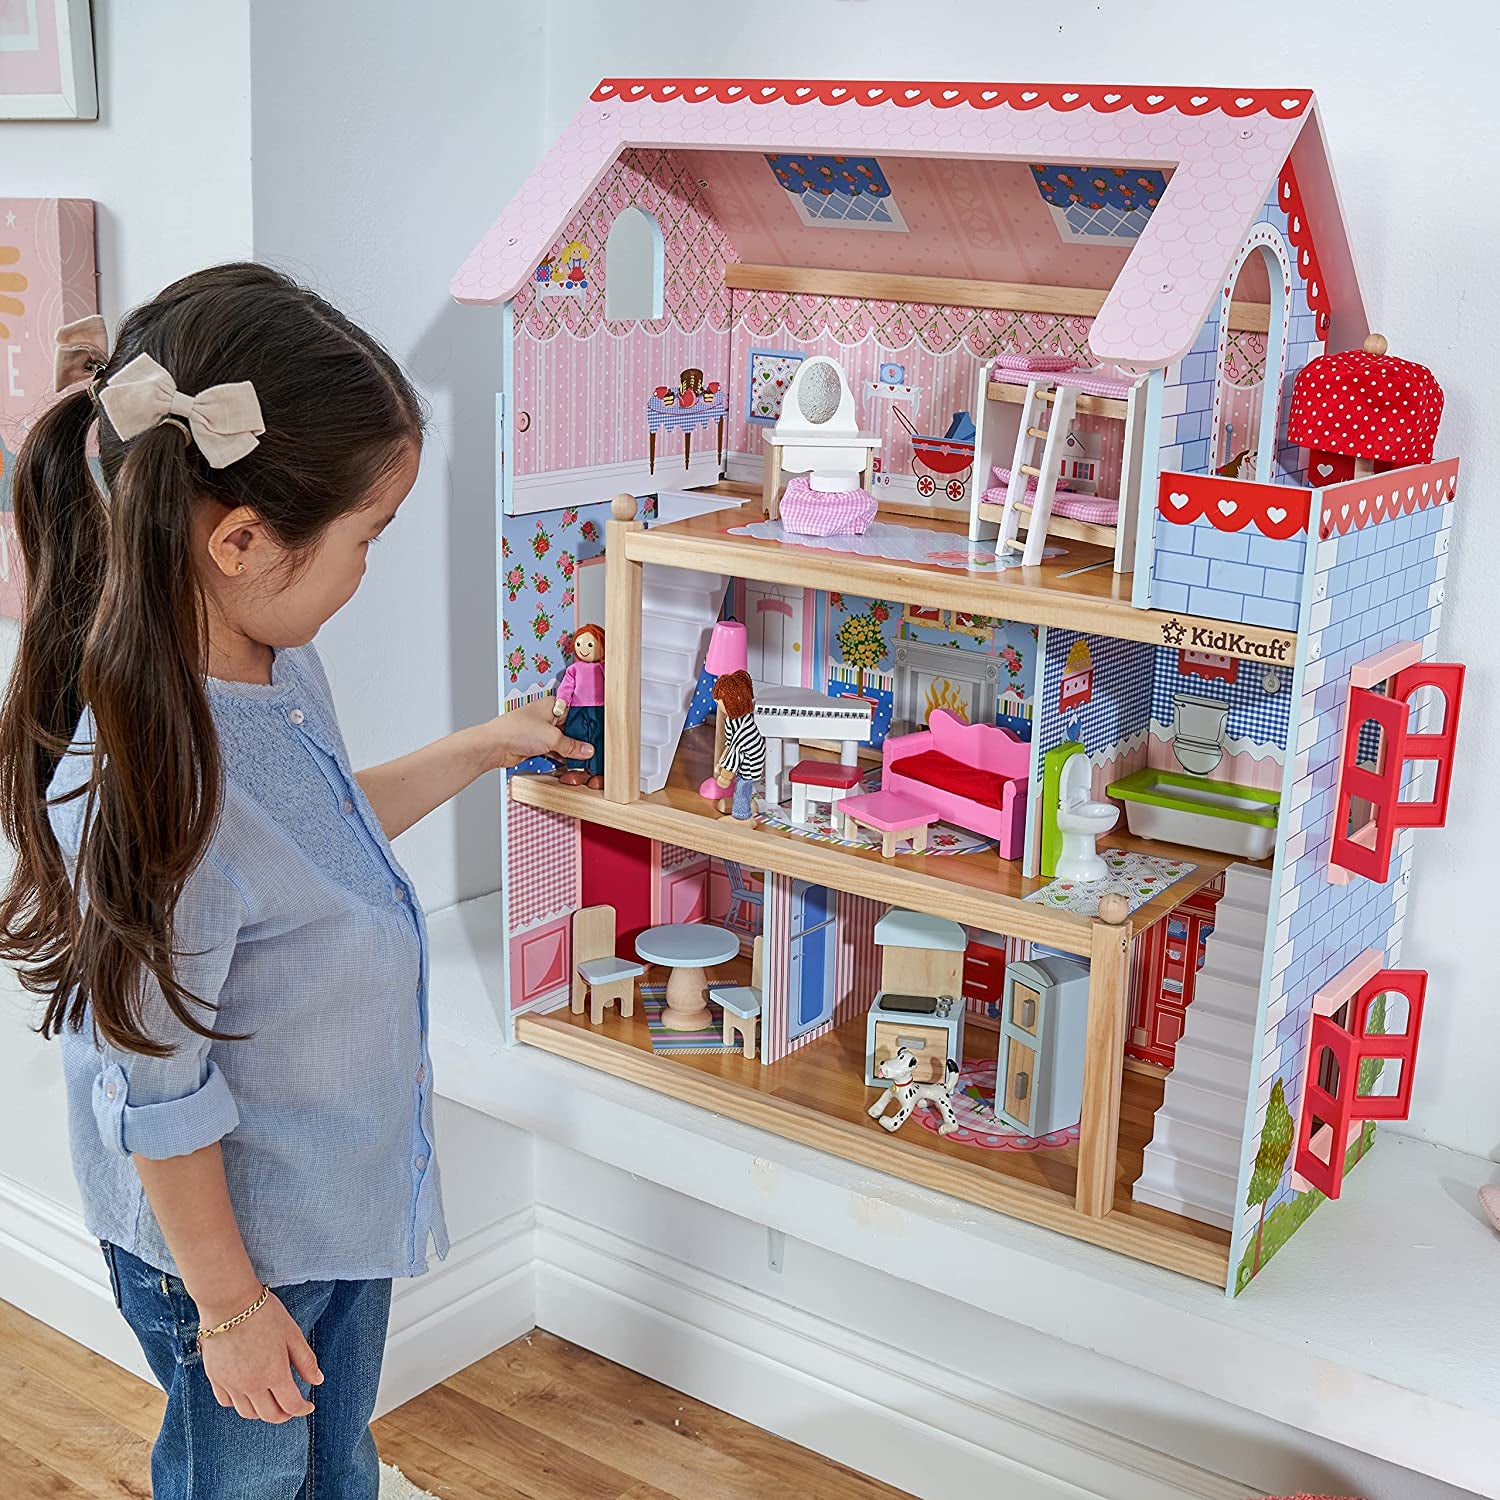 a child model playing with a large wooden dollhouse